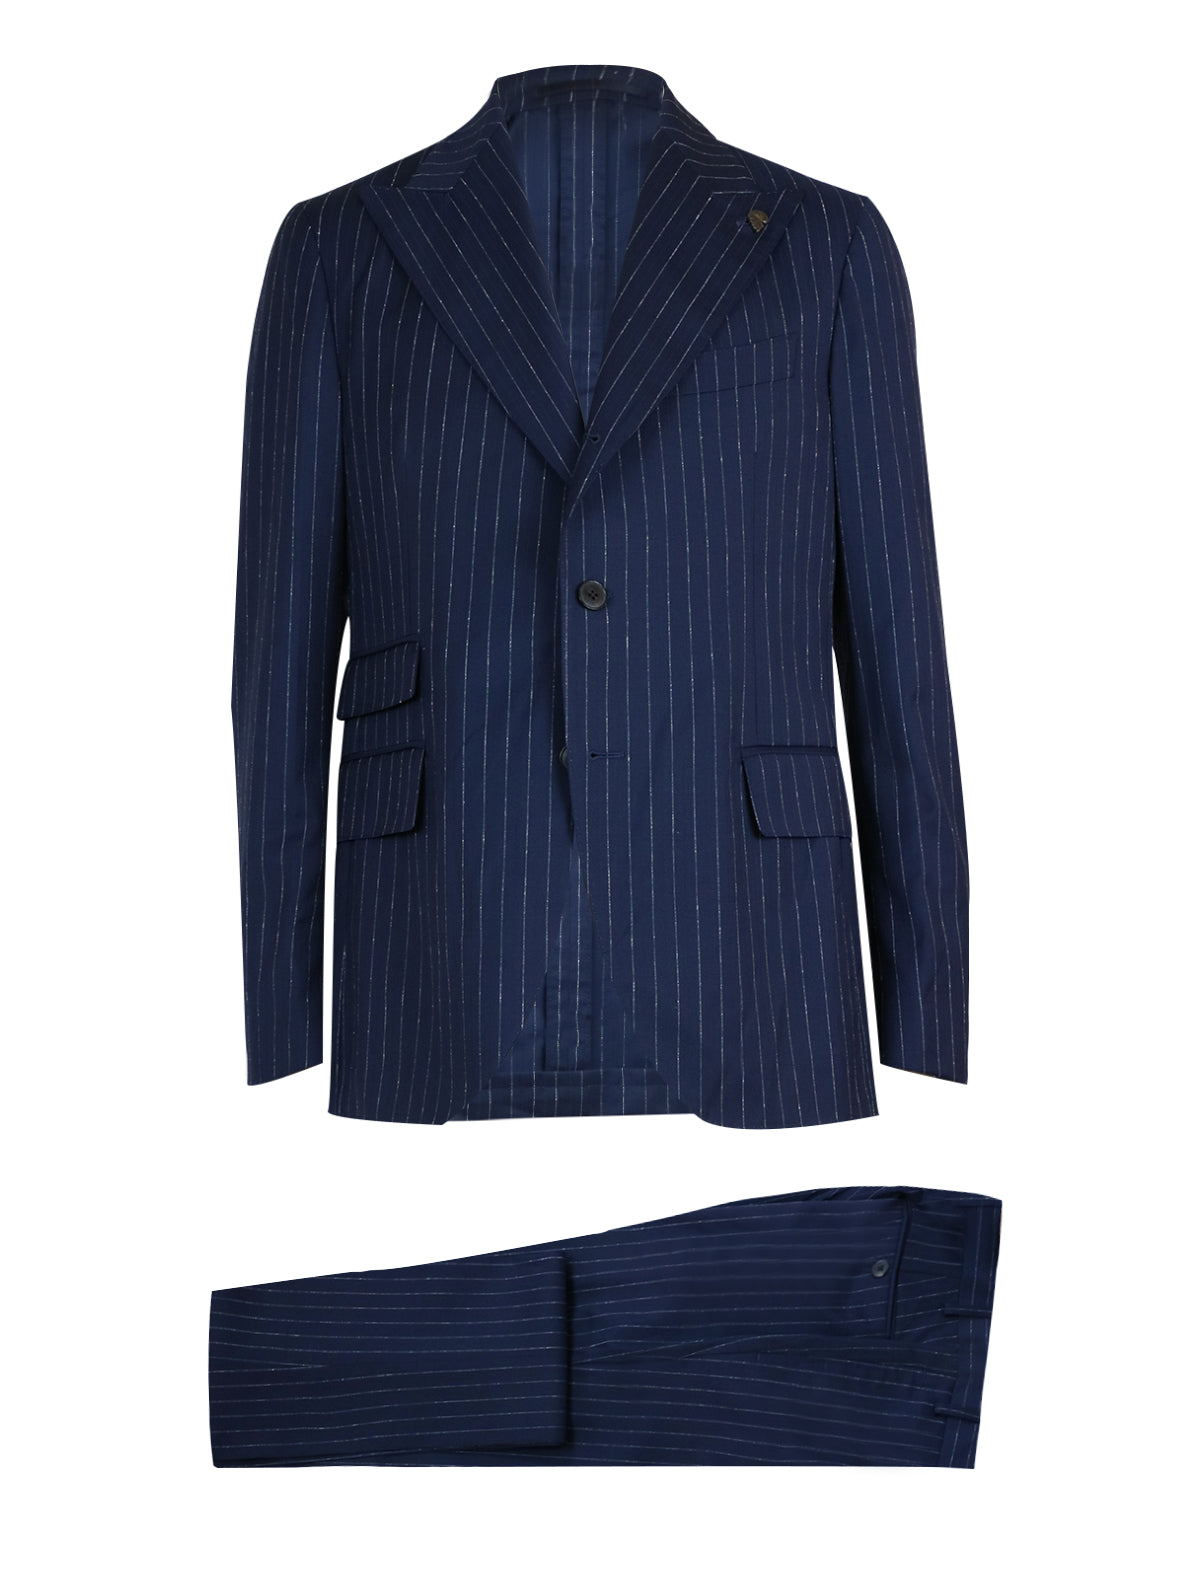 Gabriele Pasini Single-Breasted 2-Piece Suit Set in Navy Pinstripes